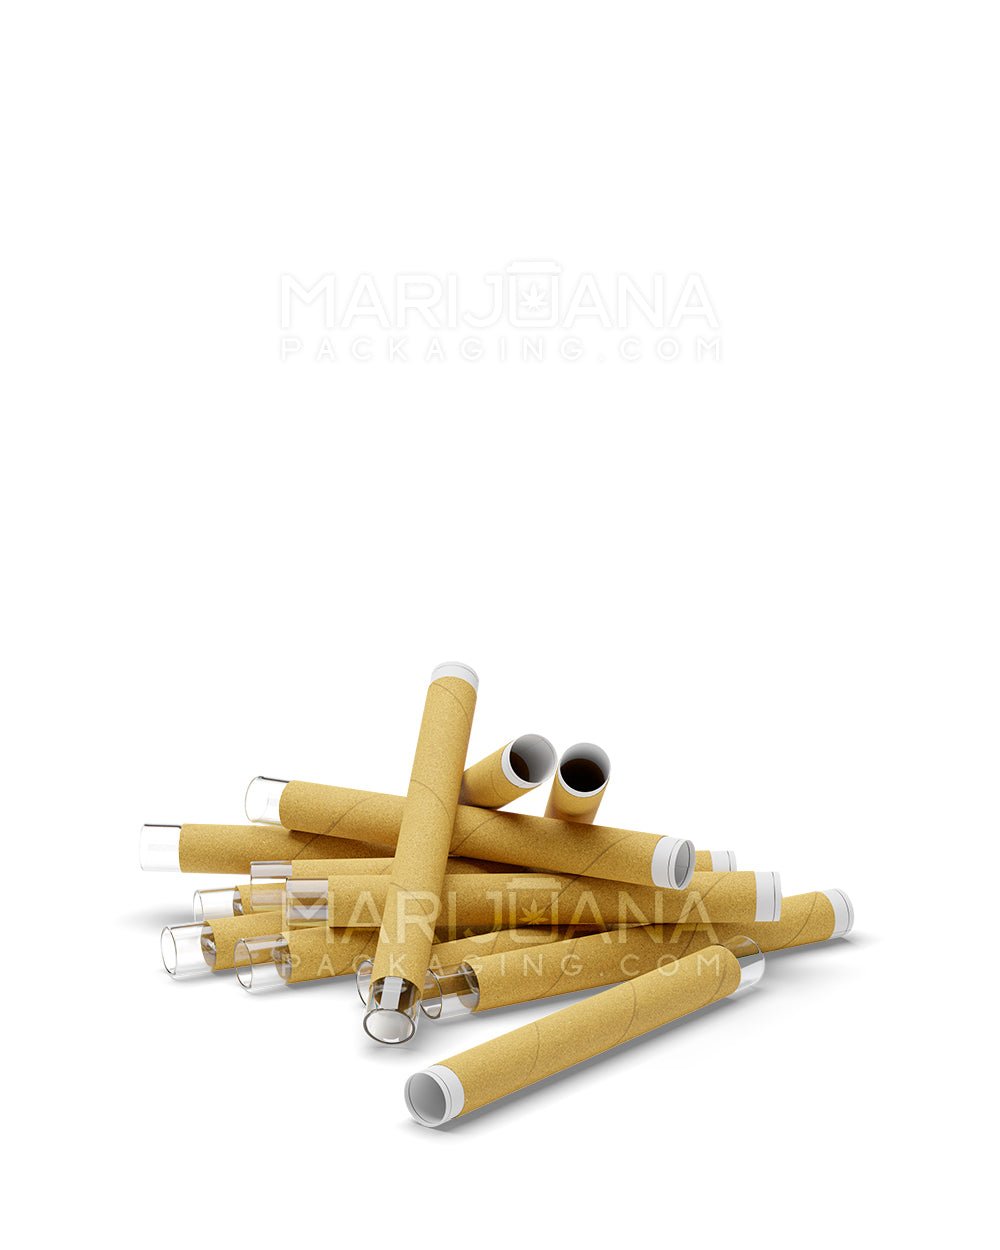 CROP KINGZ | King Size Glass Tipped Pre-Rolled Blunt Cones | 109mm - Organic Hemp - 110 Count - 5